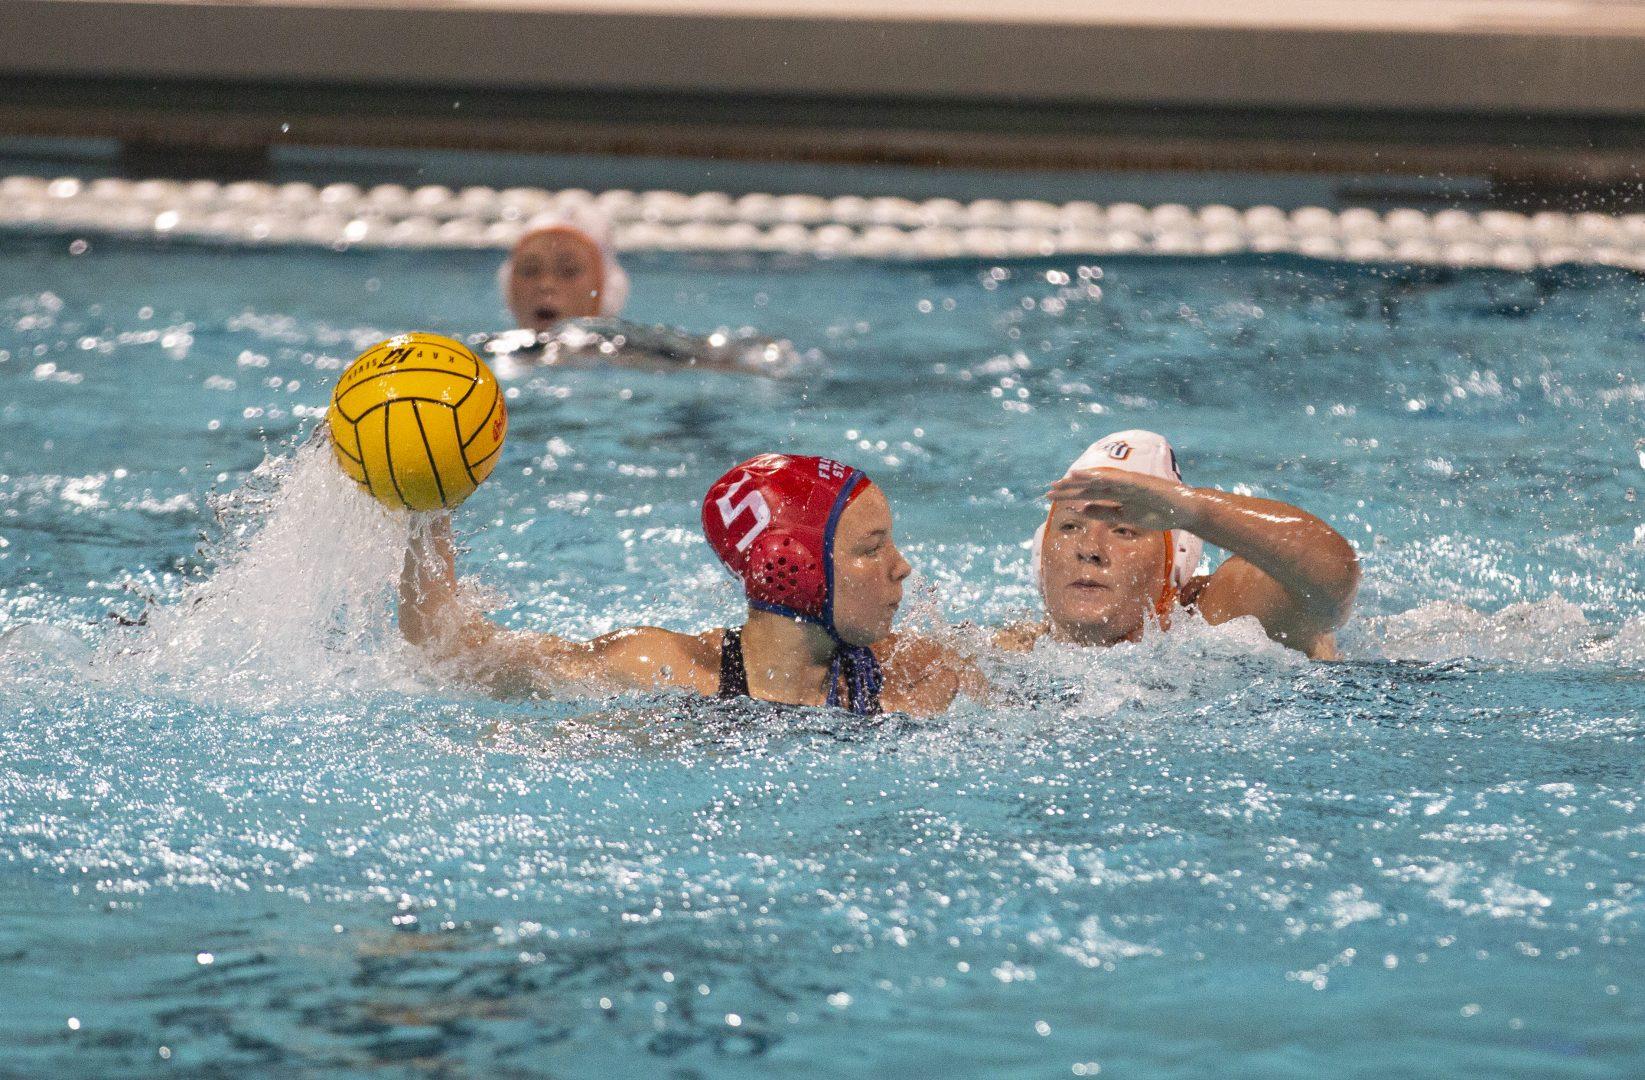 Fresno State water polo player Daphne Guevremont gets ready to pass the ball during a home match against Fresno Pacific University on Friday, Feb. 8, 2019.